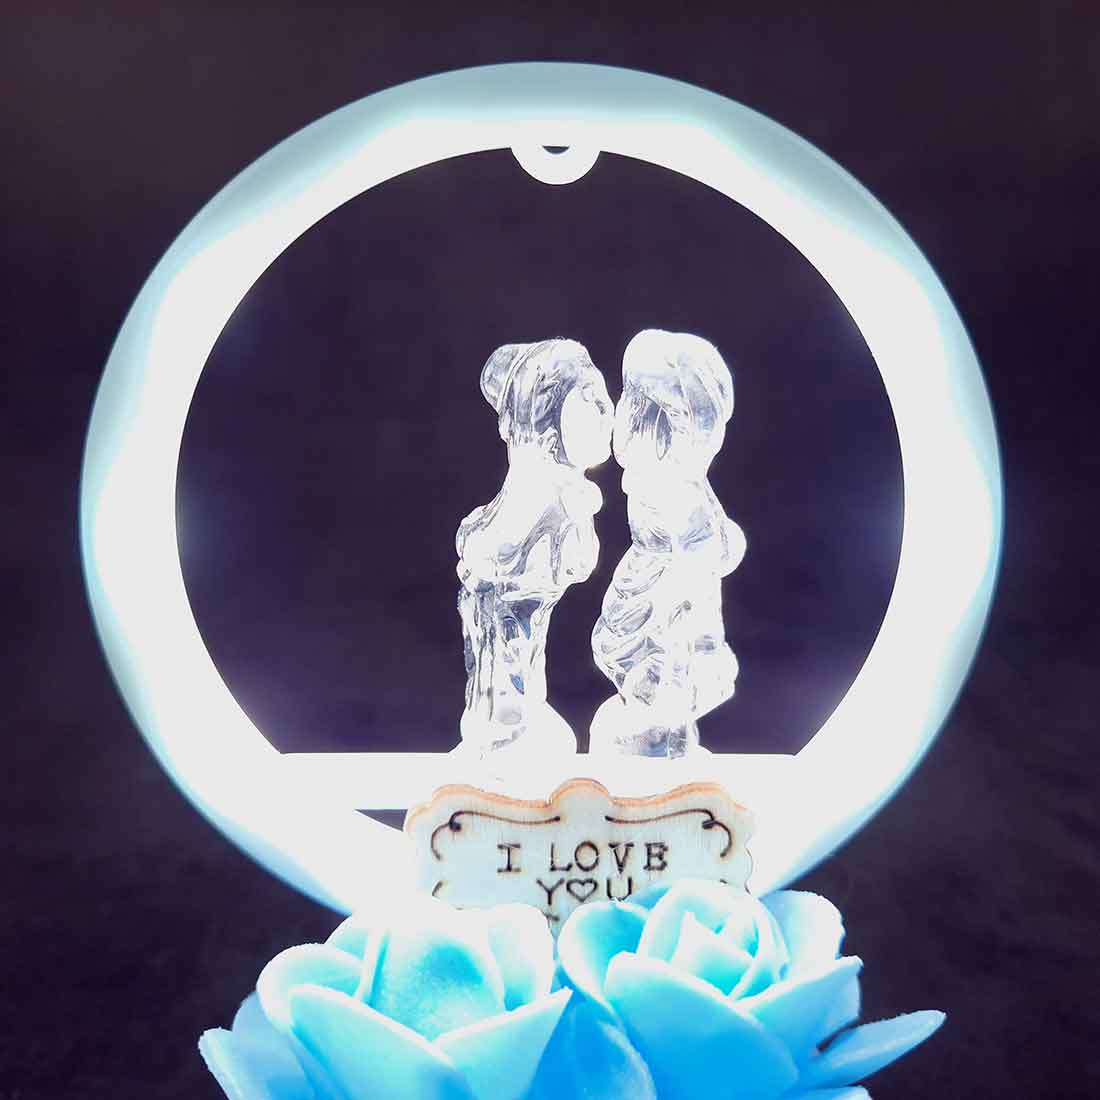 ART N HUB Antique Look Teddy Love couple Glass Dome With Lighting Effect  Showpiece Romantic Decorative